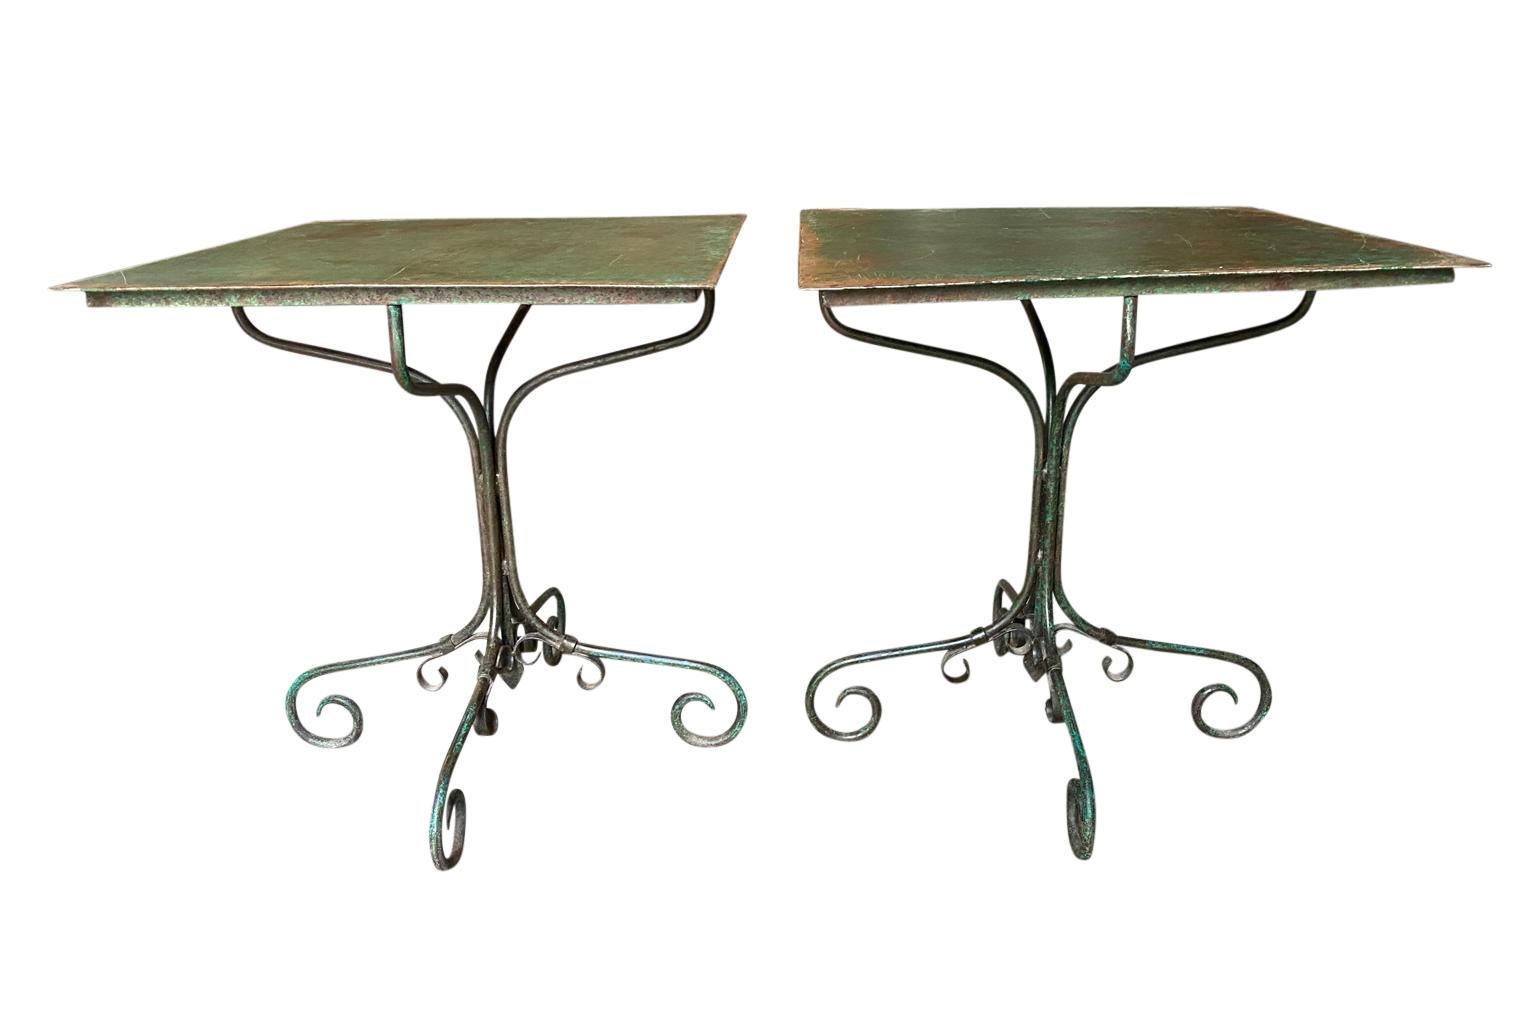 Painted Pair of 19th Century French Garden Tables